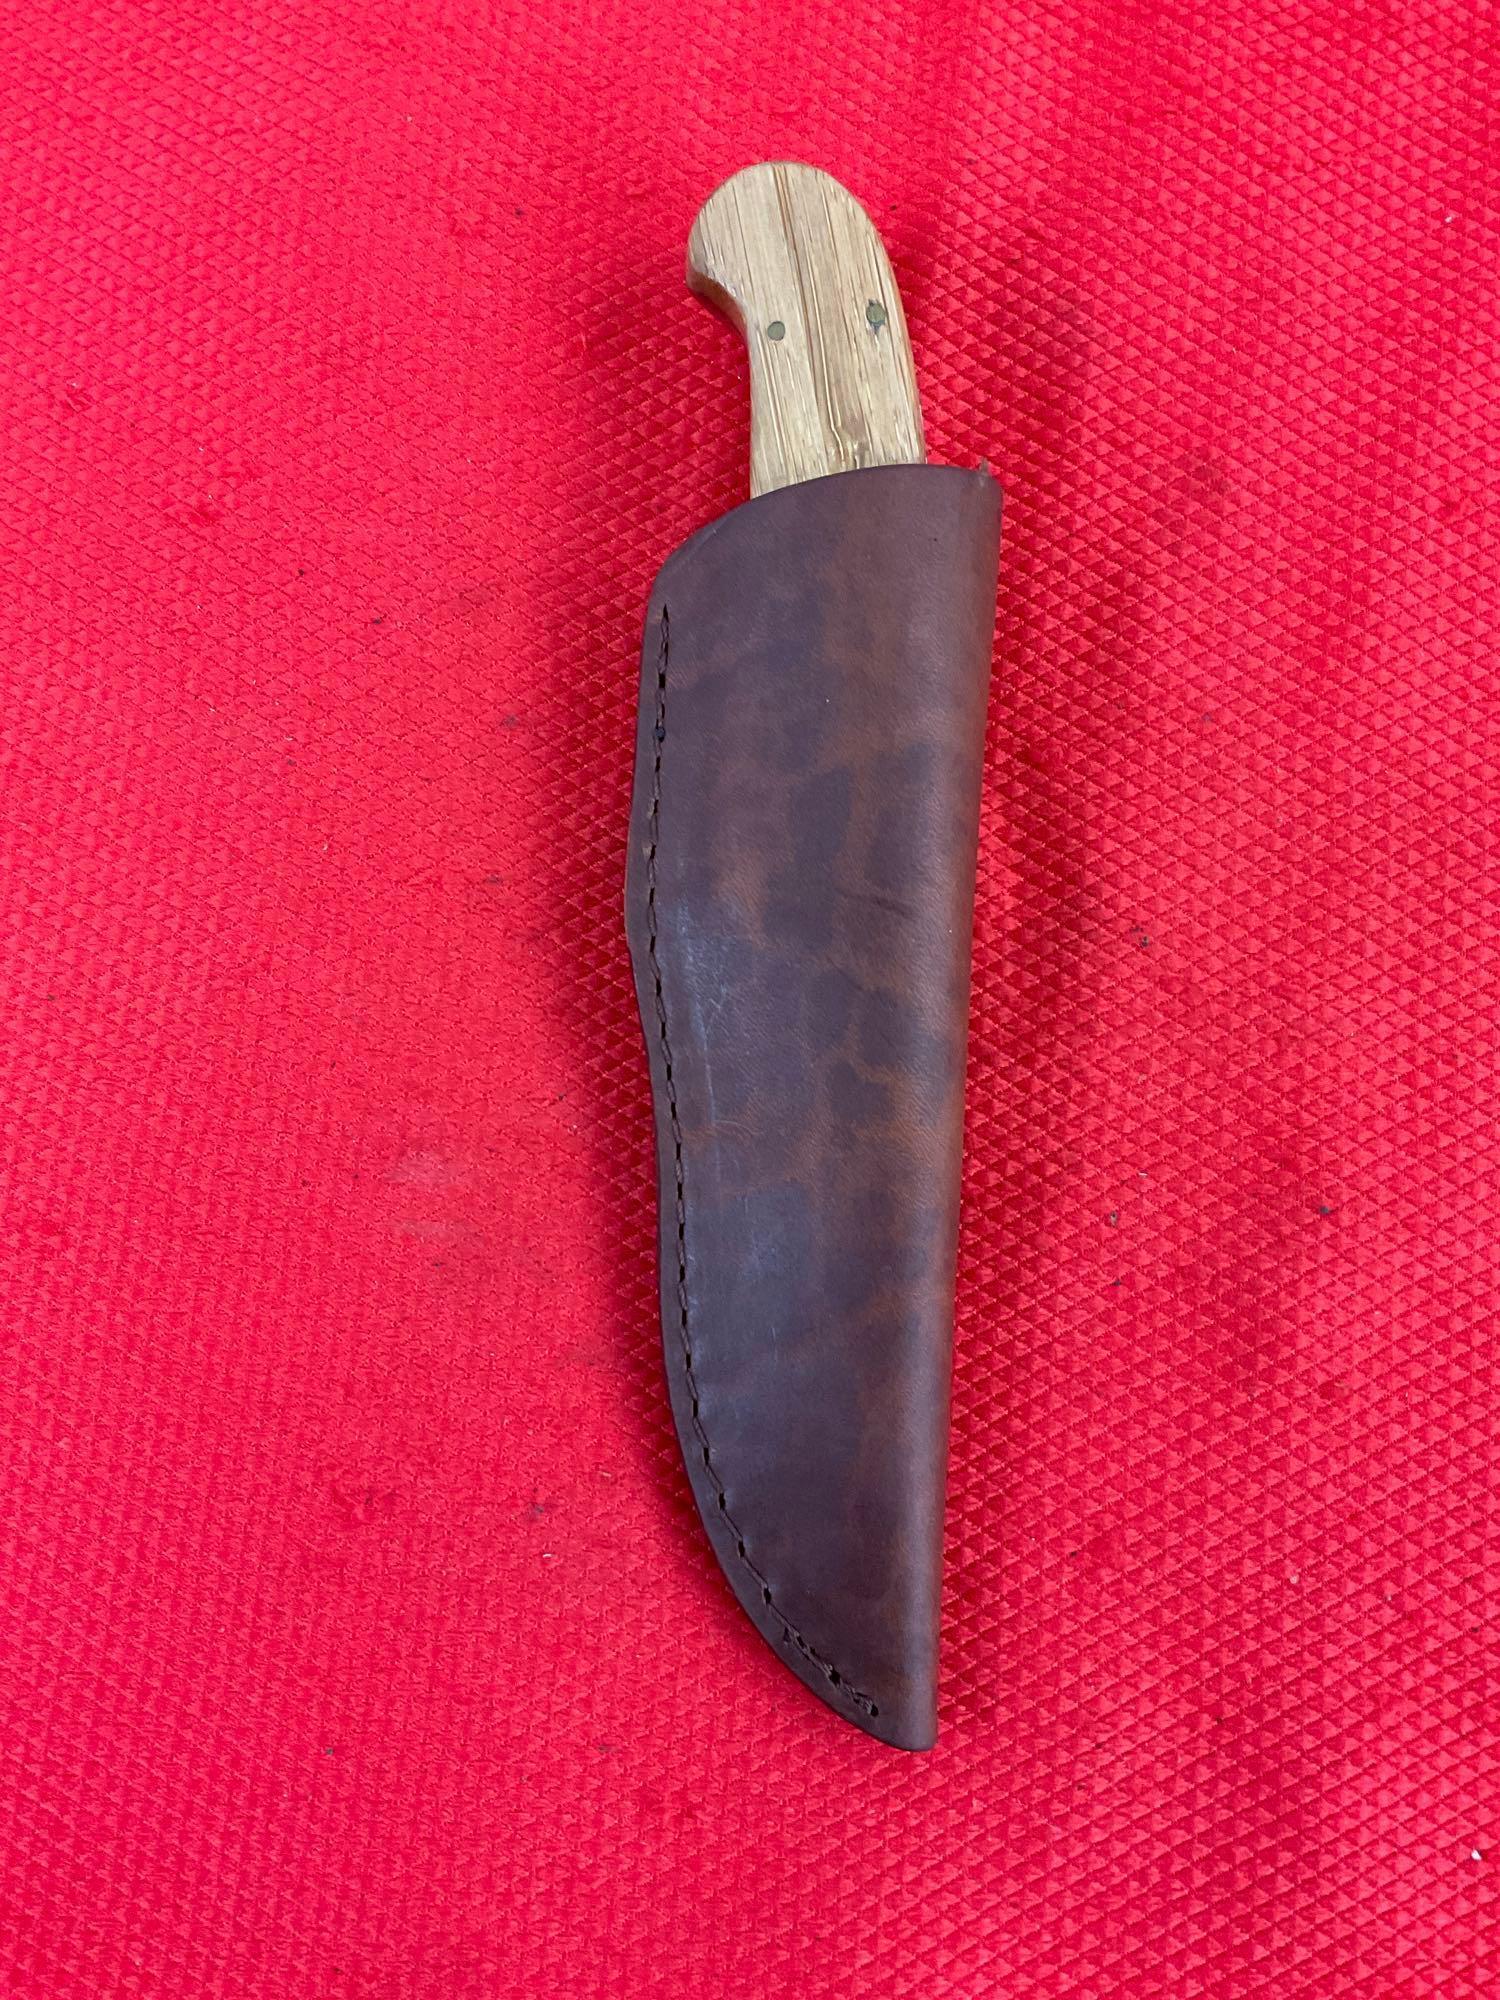 3" Steel Fixed Blade Hunting Knife w/ Wood Handle, Etched Blade & Sheath. Unknown Maker. See pics.